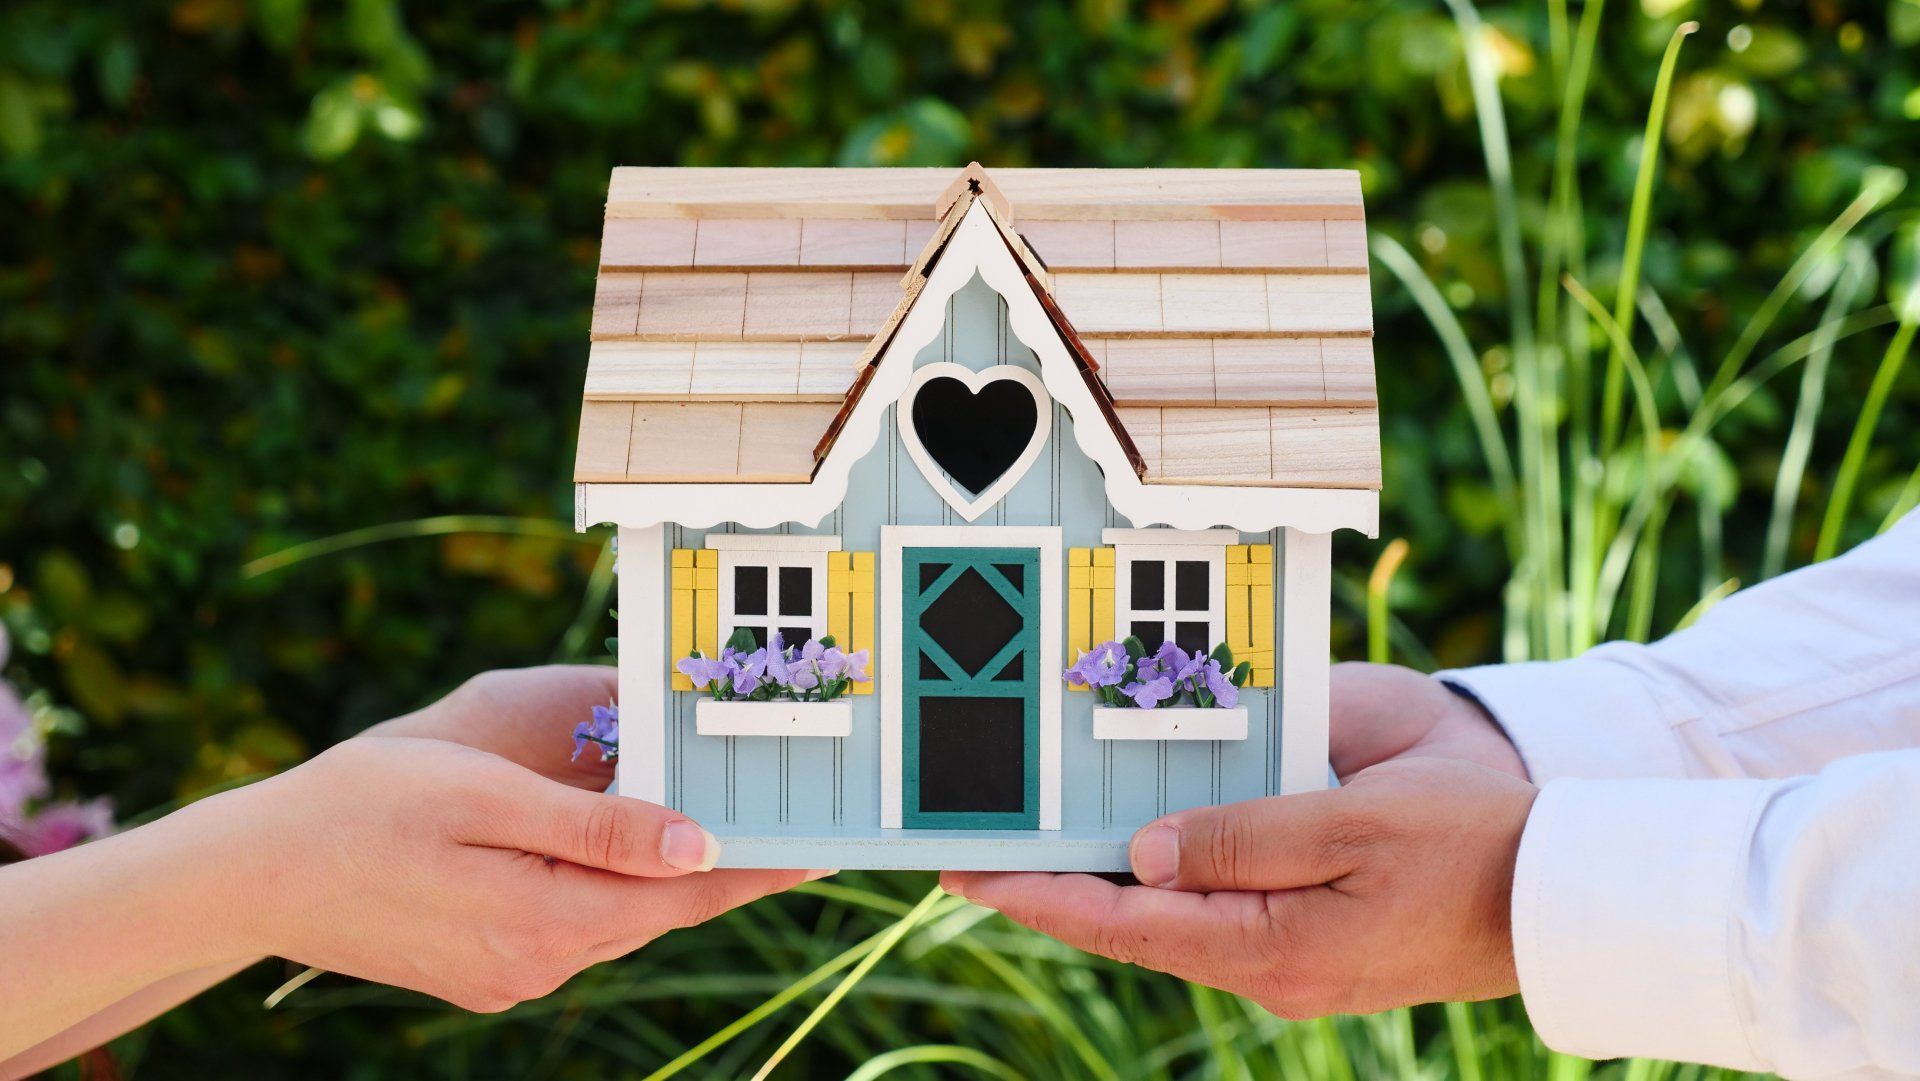 House with a heart being held by two people